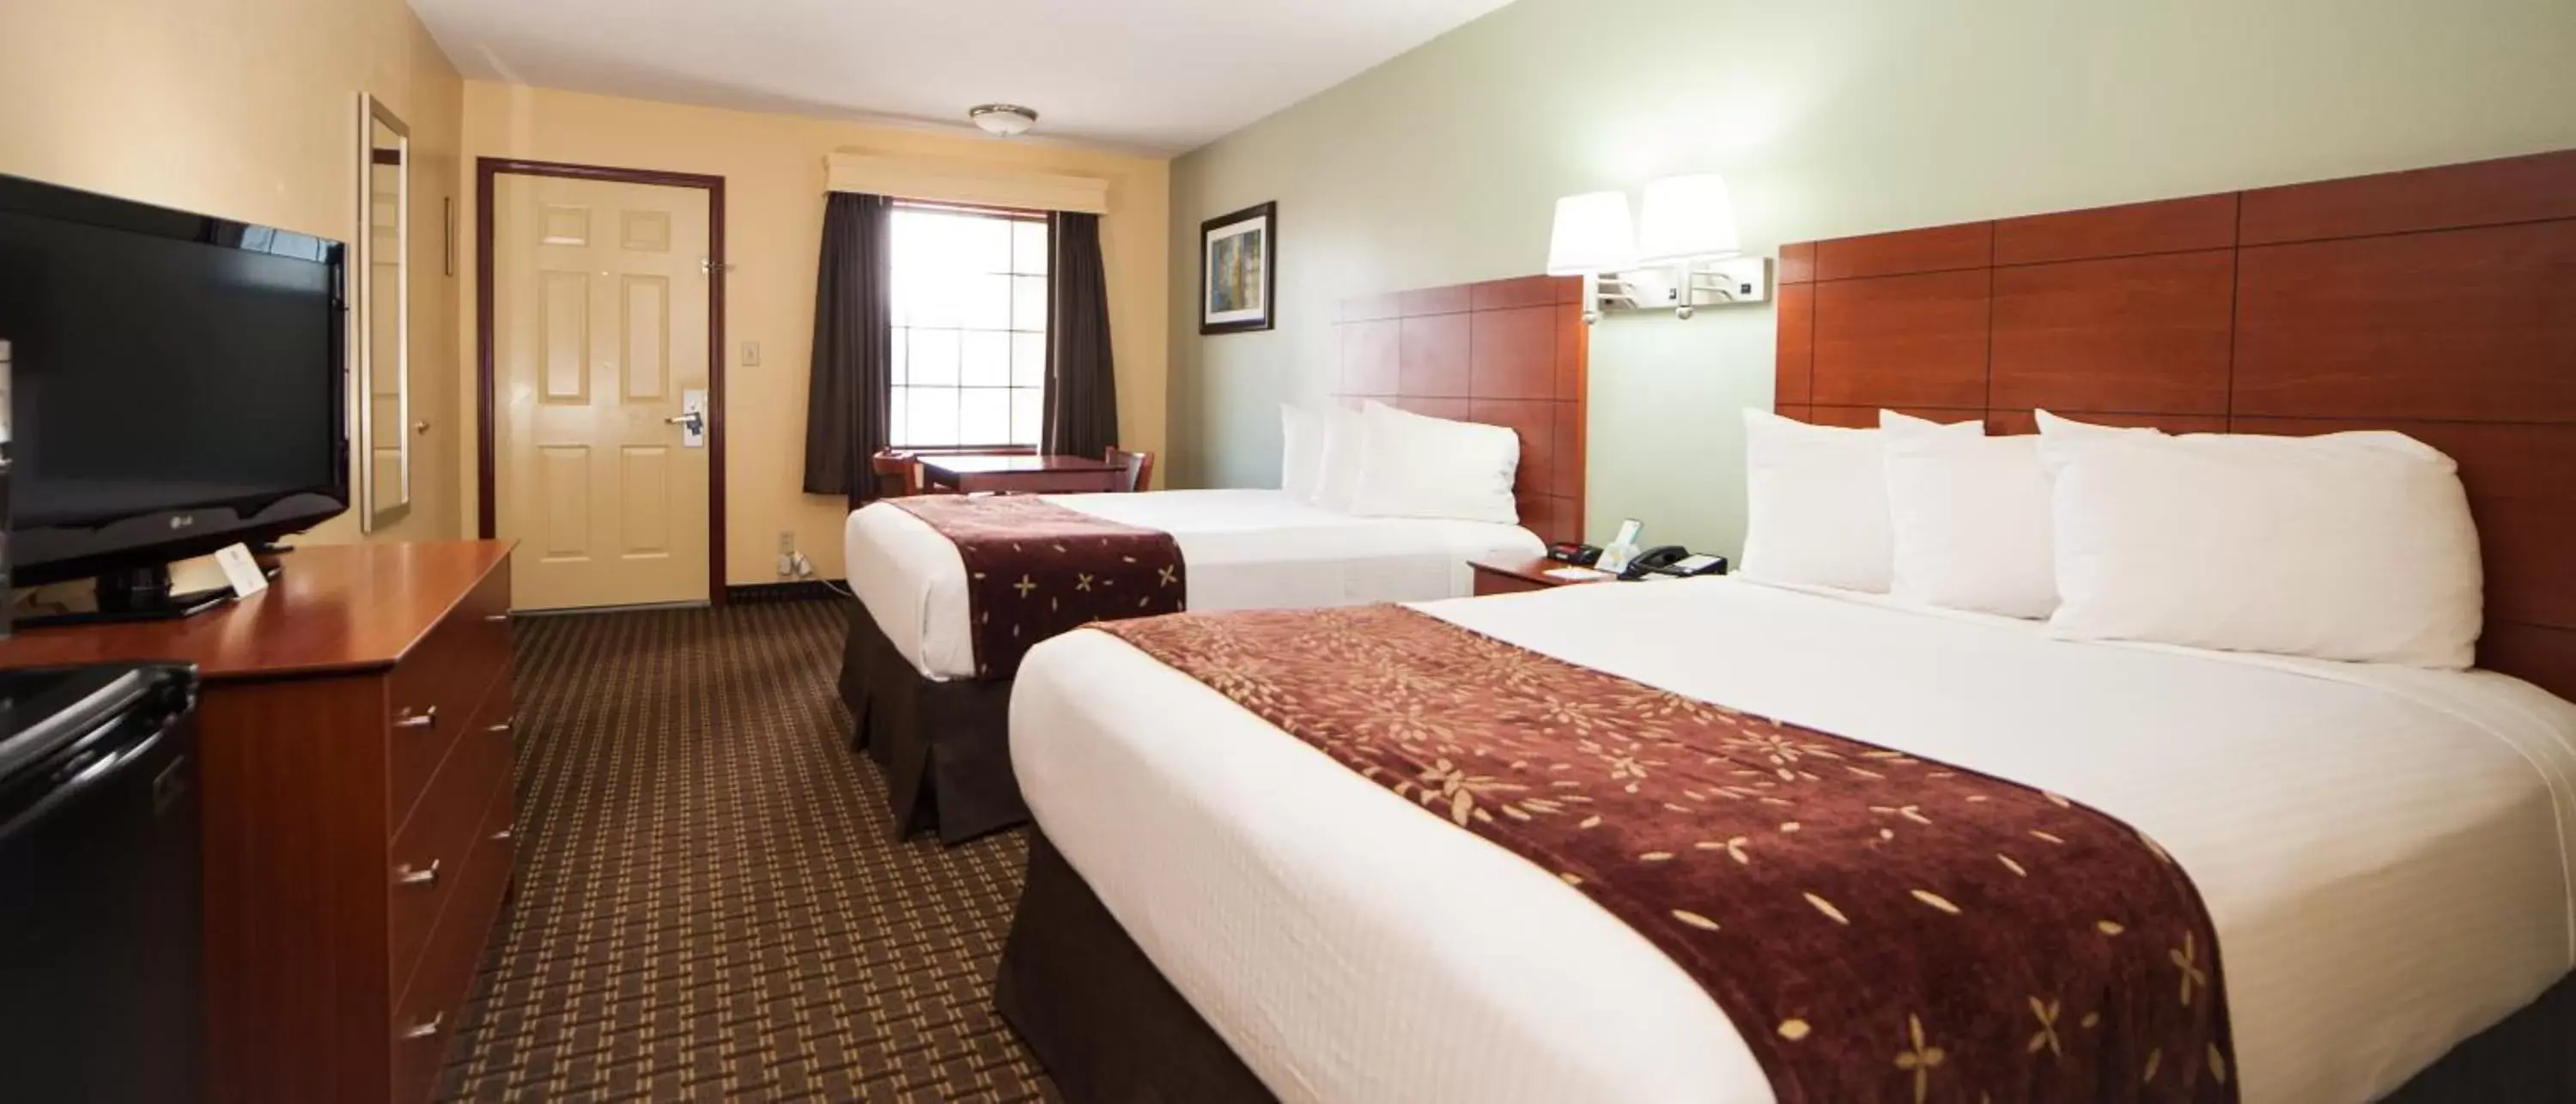 Double Room with Two Double Beds - Non-Smoking in Best Western Acworth Inn